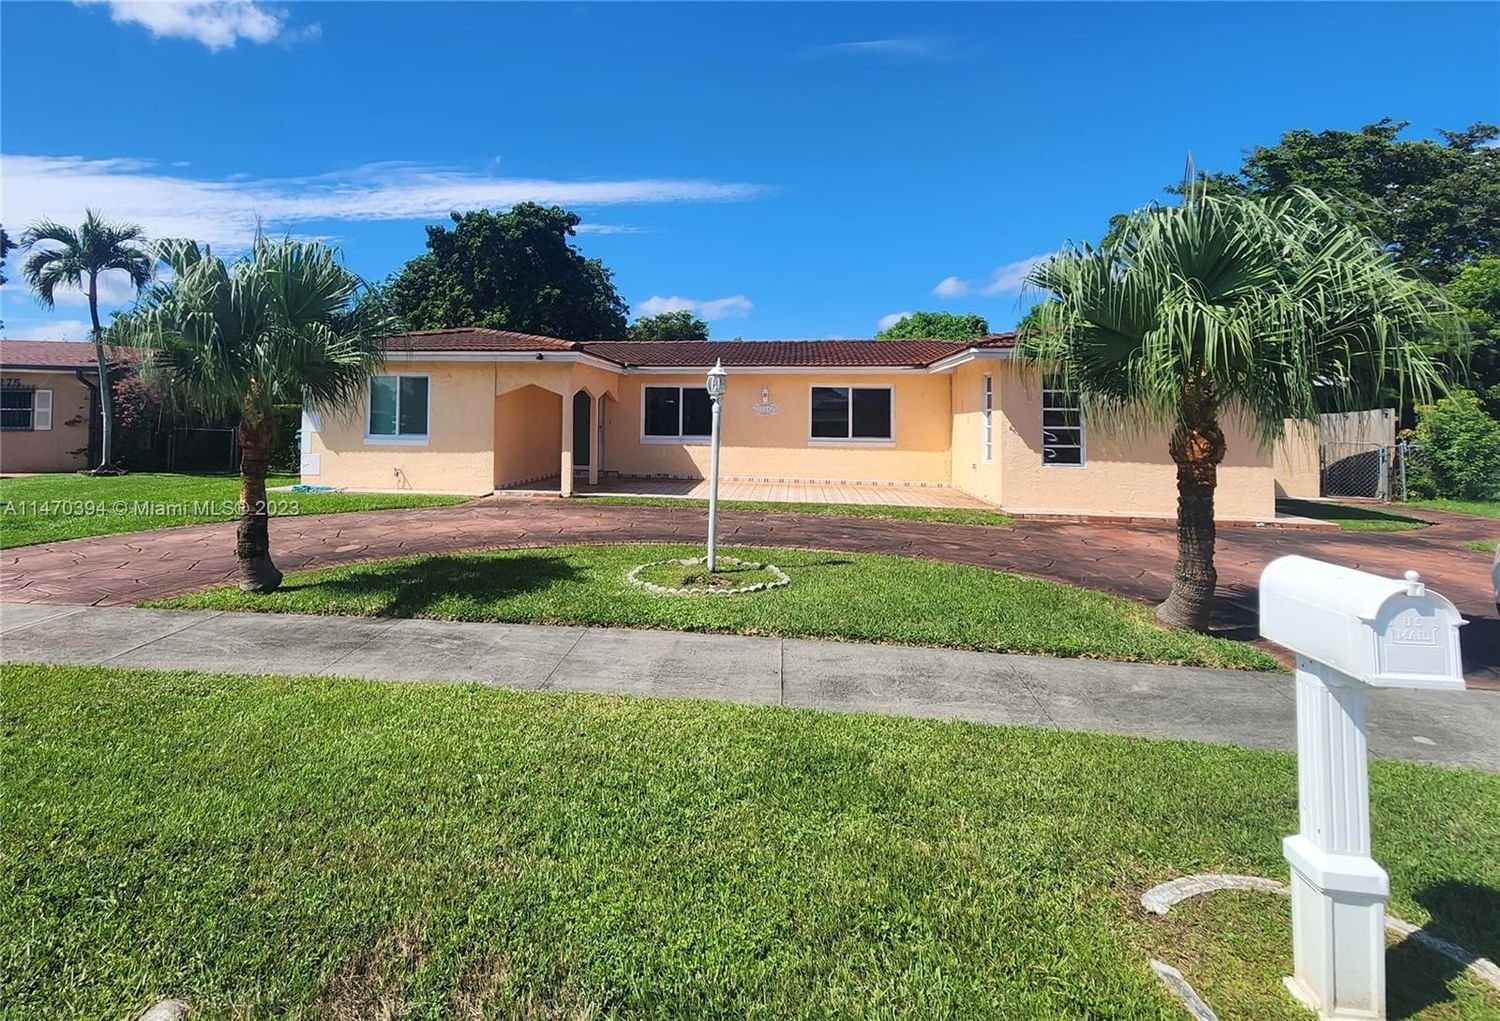 Real estate property located at 13265 53rd St, Miami-Dade County, Miami, FL